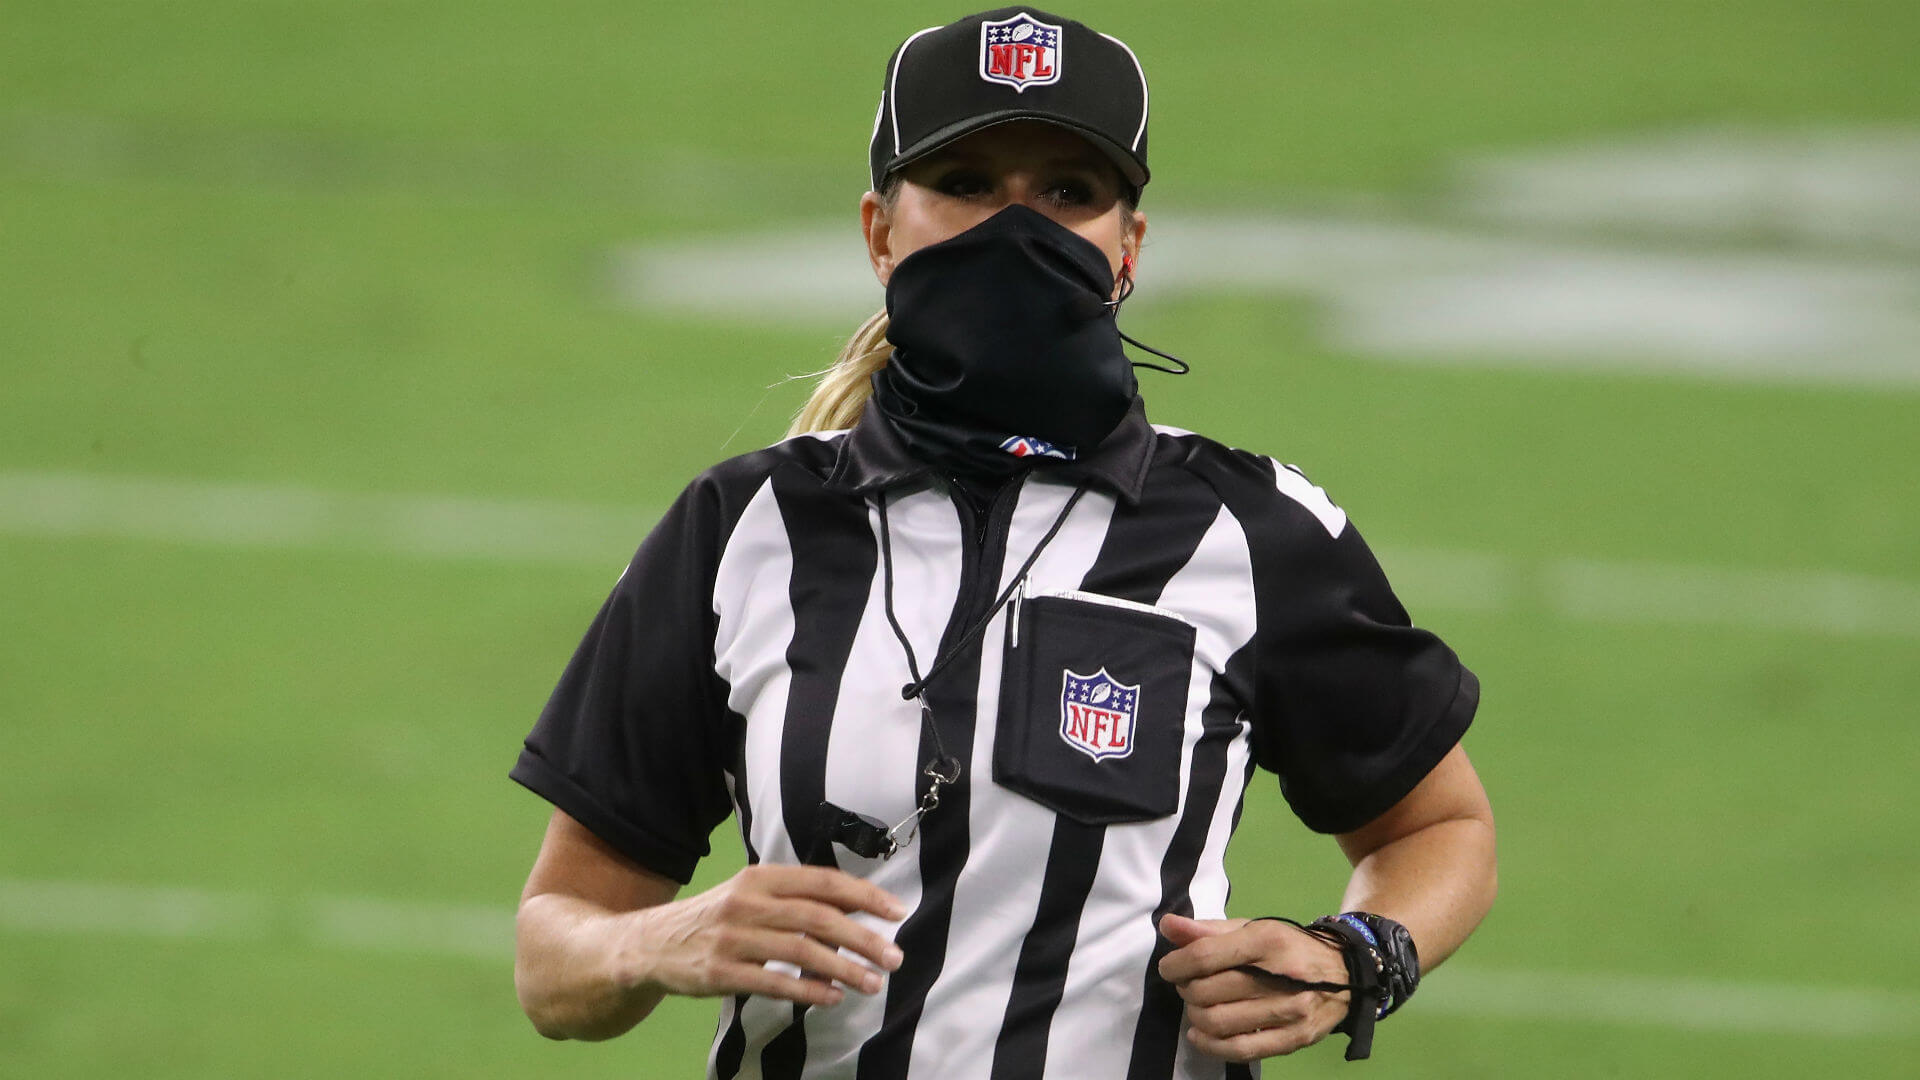 Mississippi Woman To Become First Woman to Officiate Super Bowl